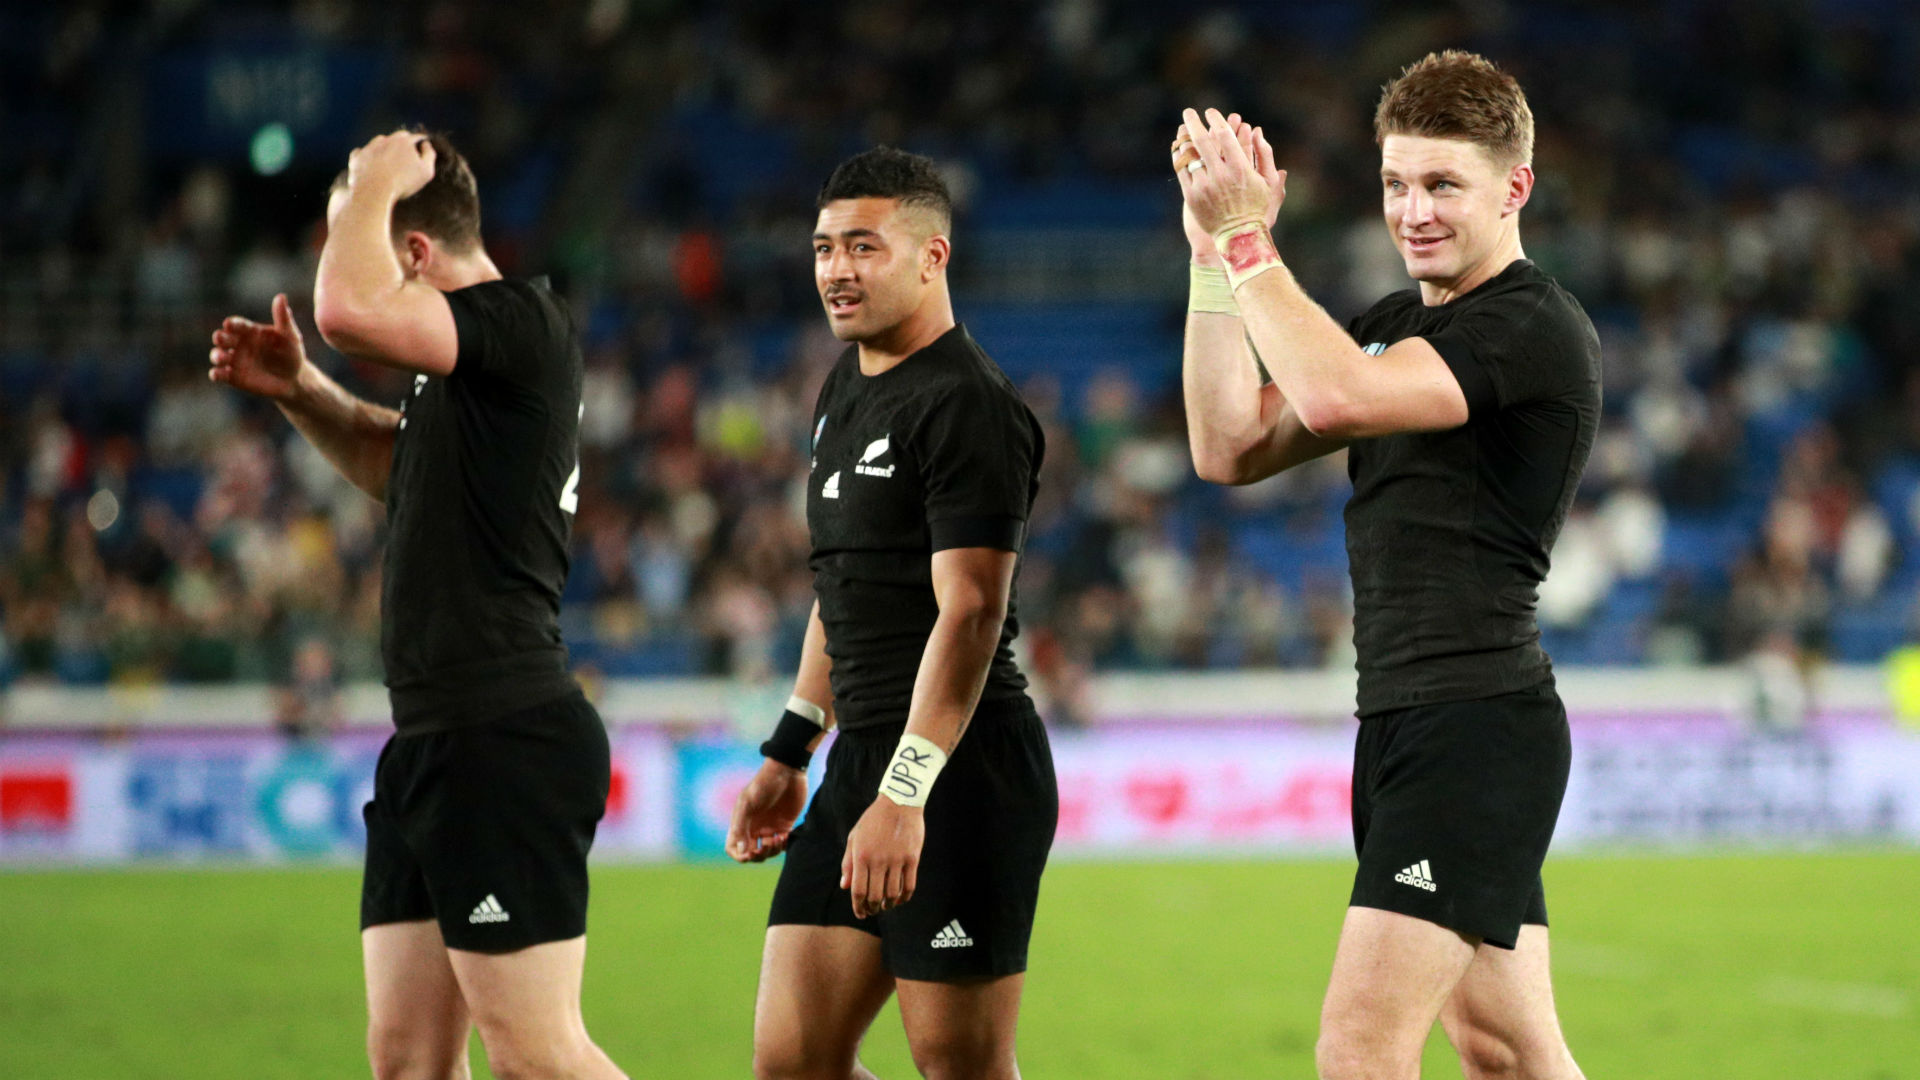 New Zealand started their Rugby World Cup campaign impressively but Steve Hansen said: "There's plenty of stuff we can work on."